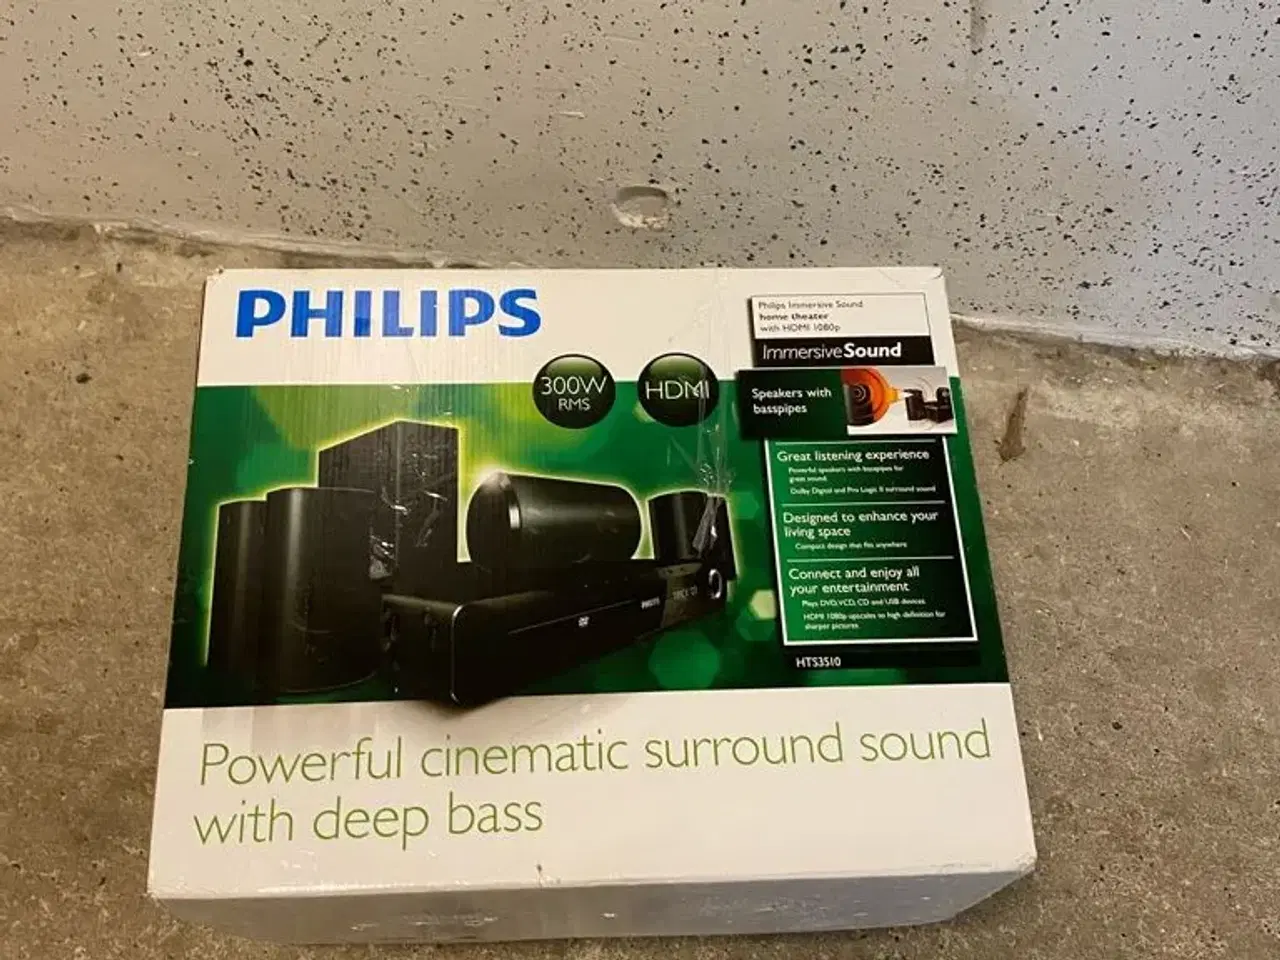 Billede 2 - Philips 5.1 Home theater HTS3510